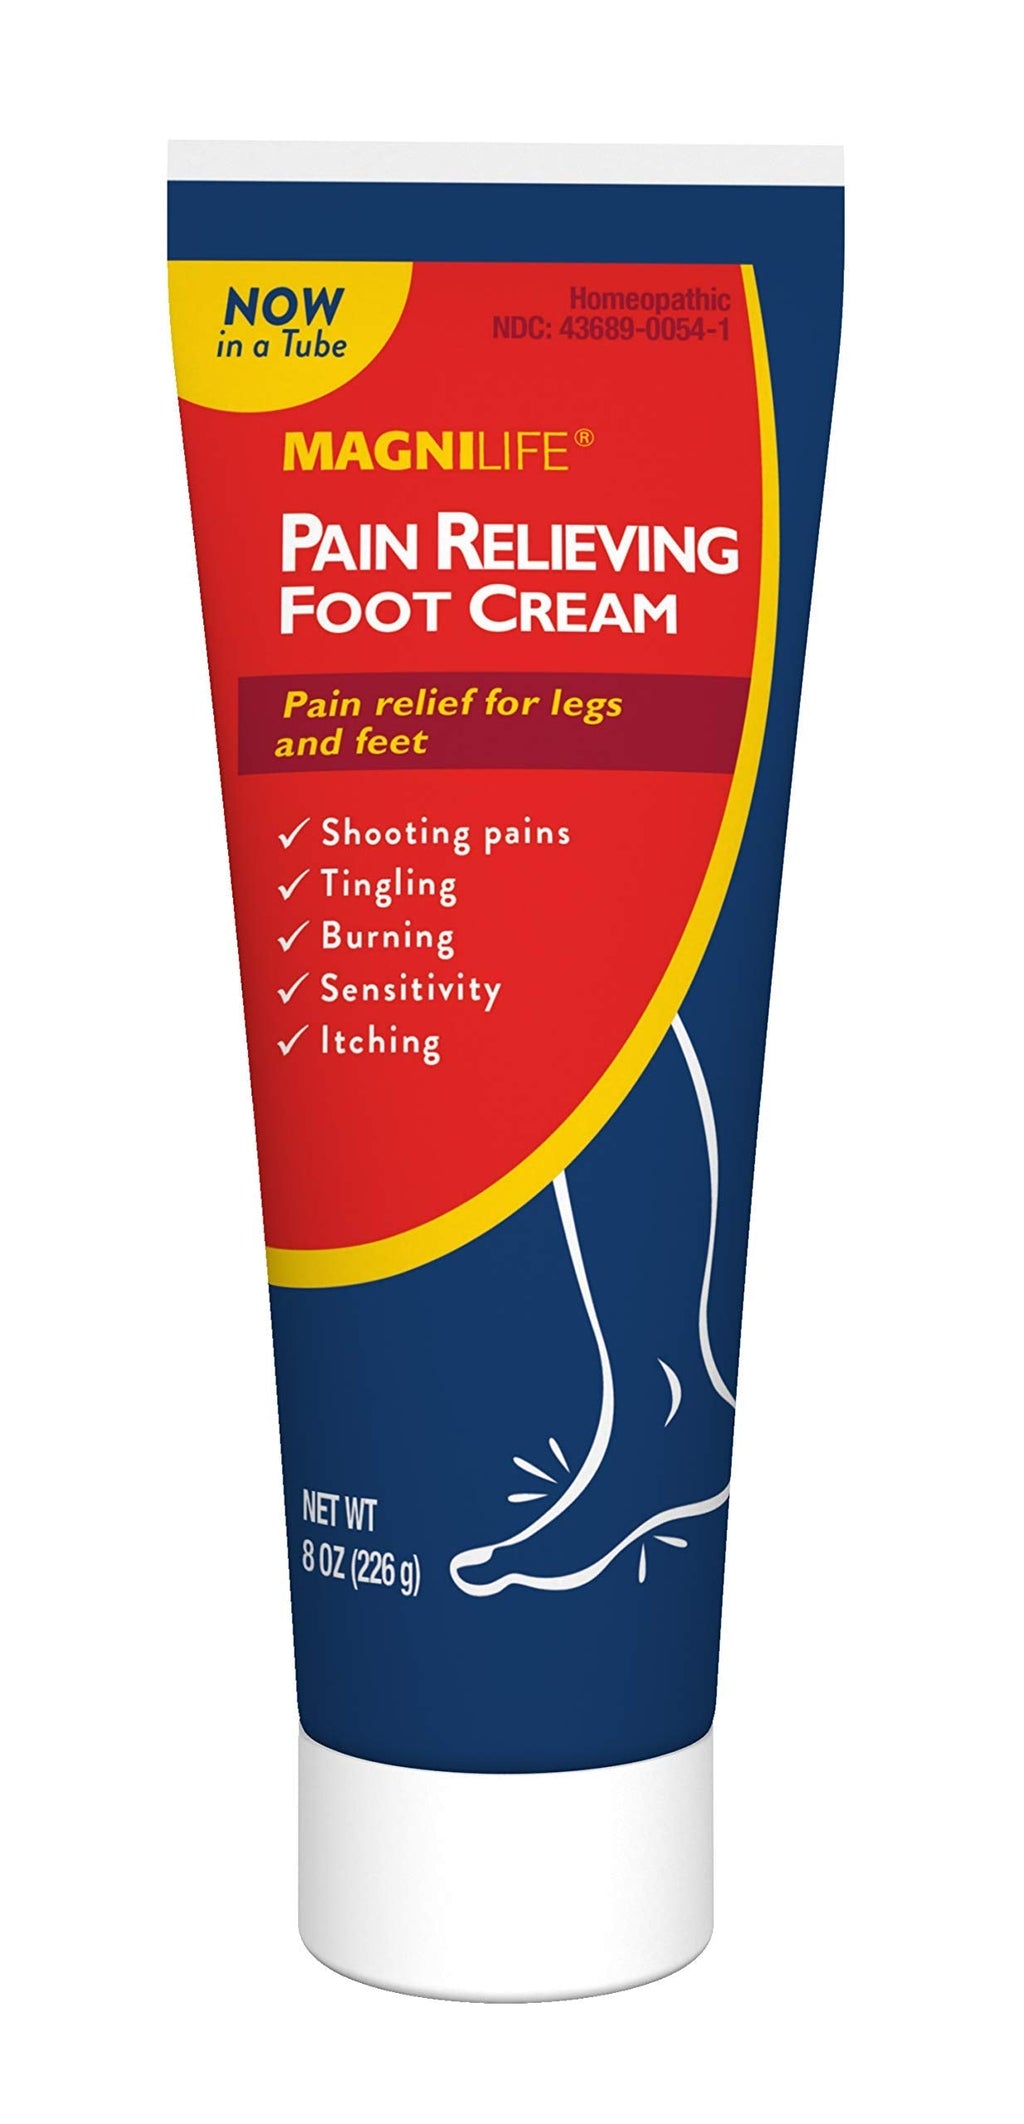 [Australia] - MagniLife Pain Relieving Foot Cream, All-Natural Moisturizing Foot Pain Relief with Beeswax and Eucalyptus to Soothe Soreness, Burning, Tingling, and Sensitivity - 8oz 8 oz 